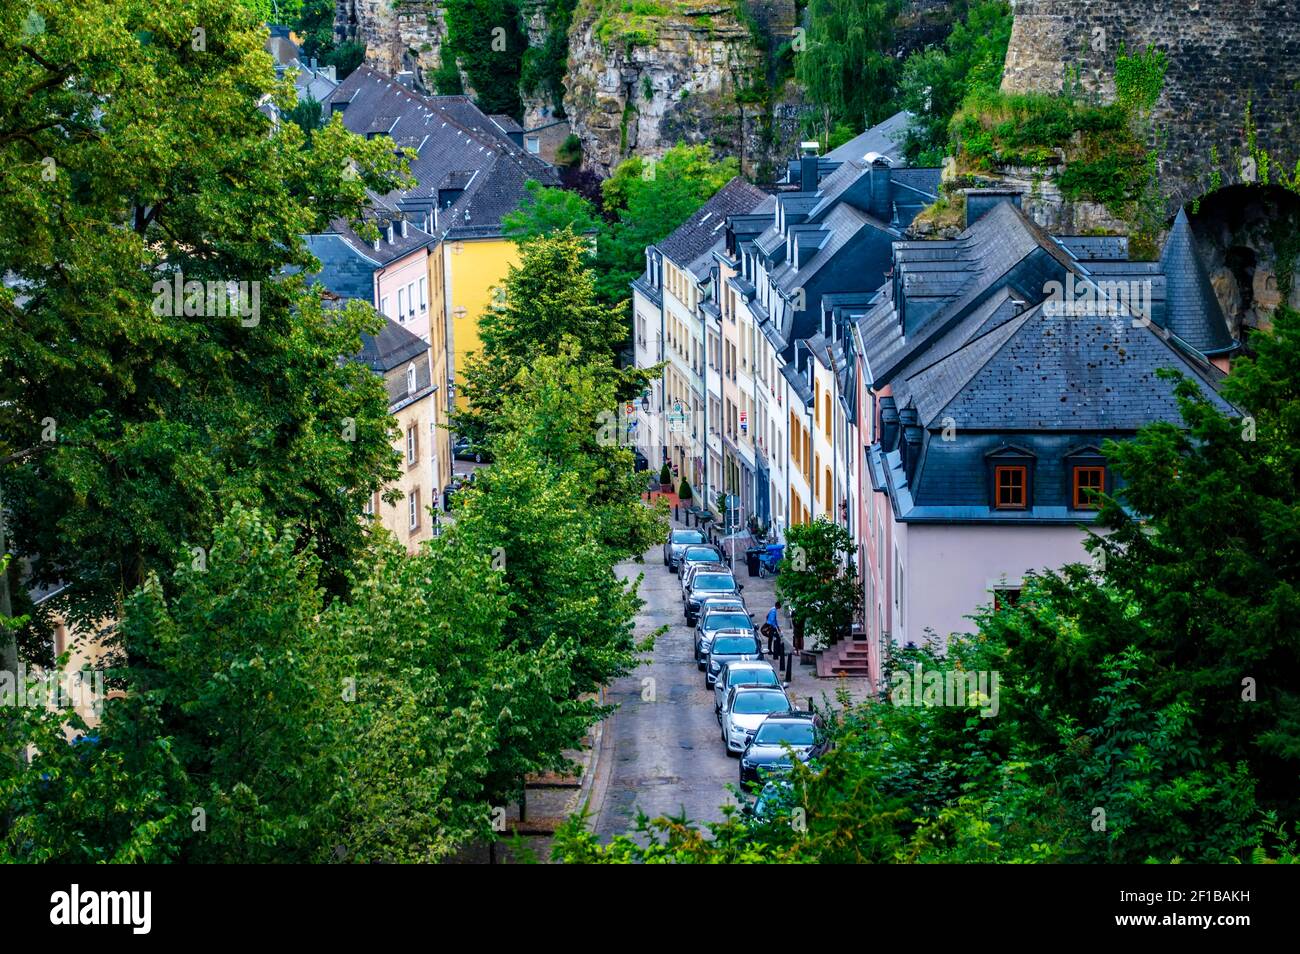 Luxembourg city, Luxembourg - July 16, 2019: A narrow street with typical buildings in Old Town of Luxembourg city in Europe Stock Photo